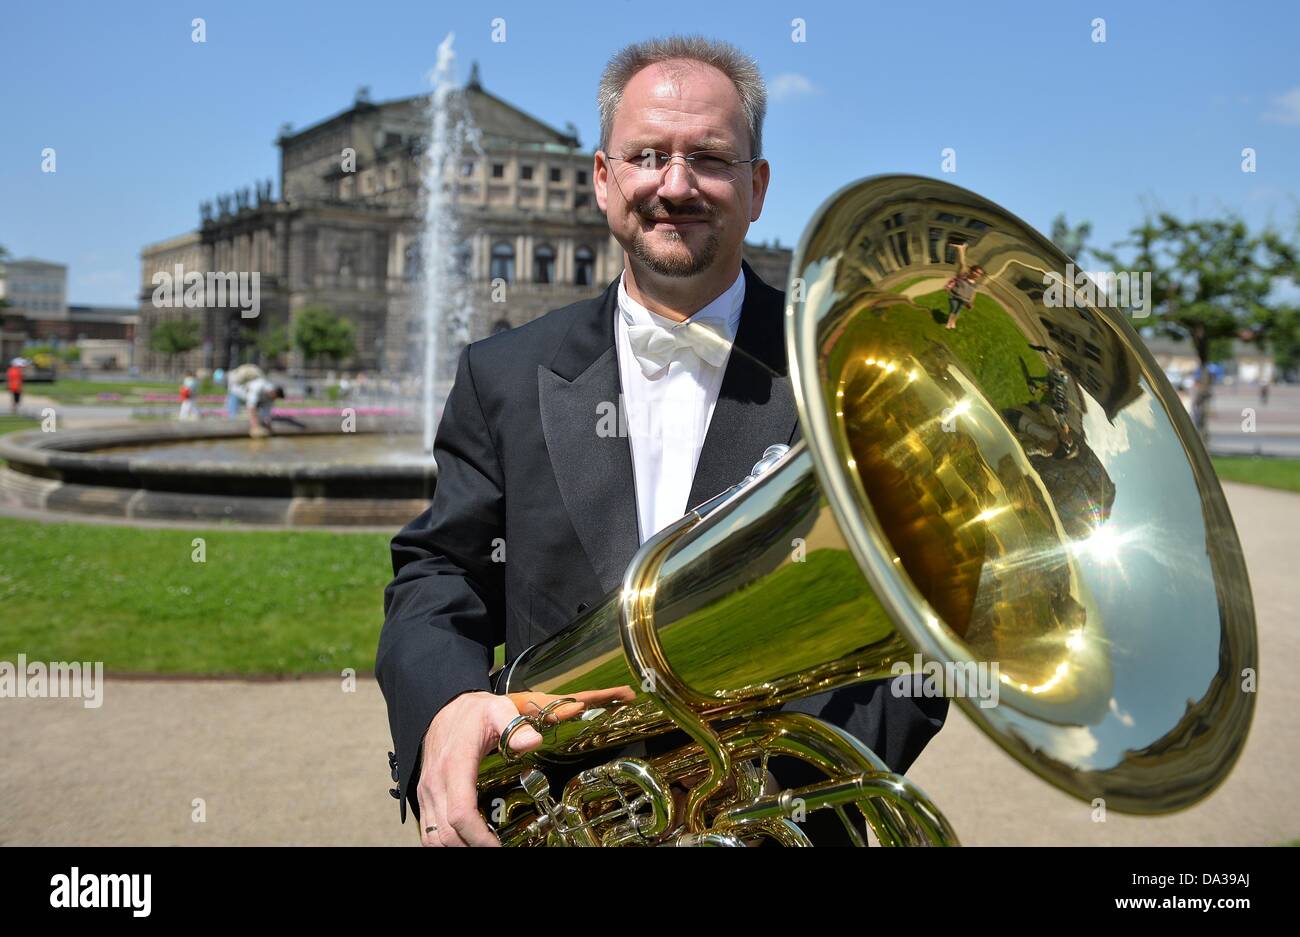 Professor Joerg Wachsmuth, tuba soloits with the Dresden Philharmonie,  stands with his tuba outside of the Semper Opera in Dresden, Germany, 02  July 2013. For the opening of the Dresden city festival